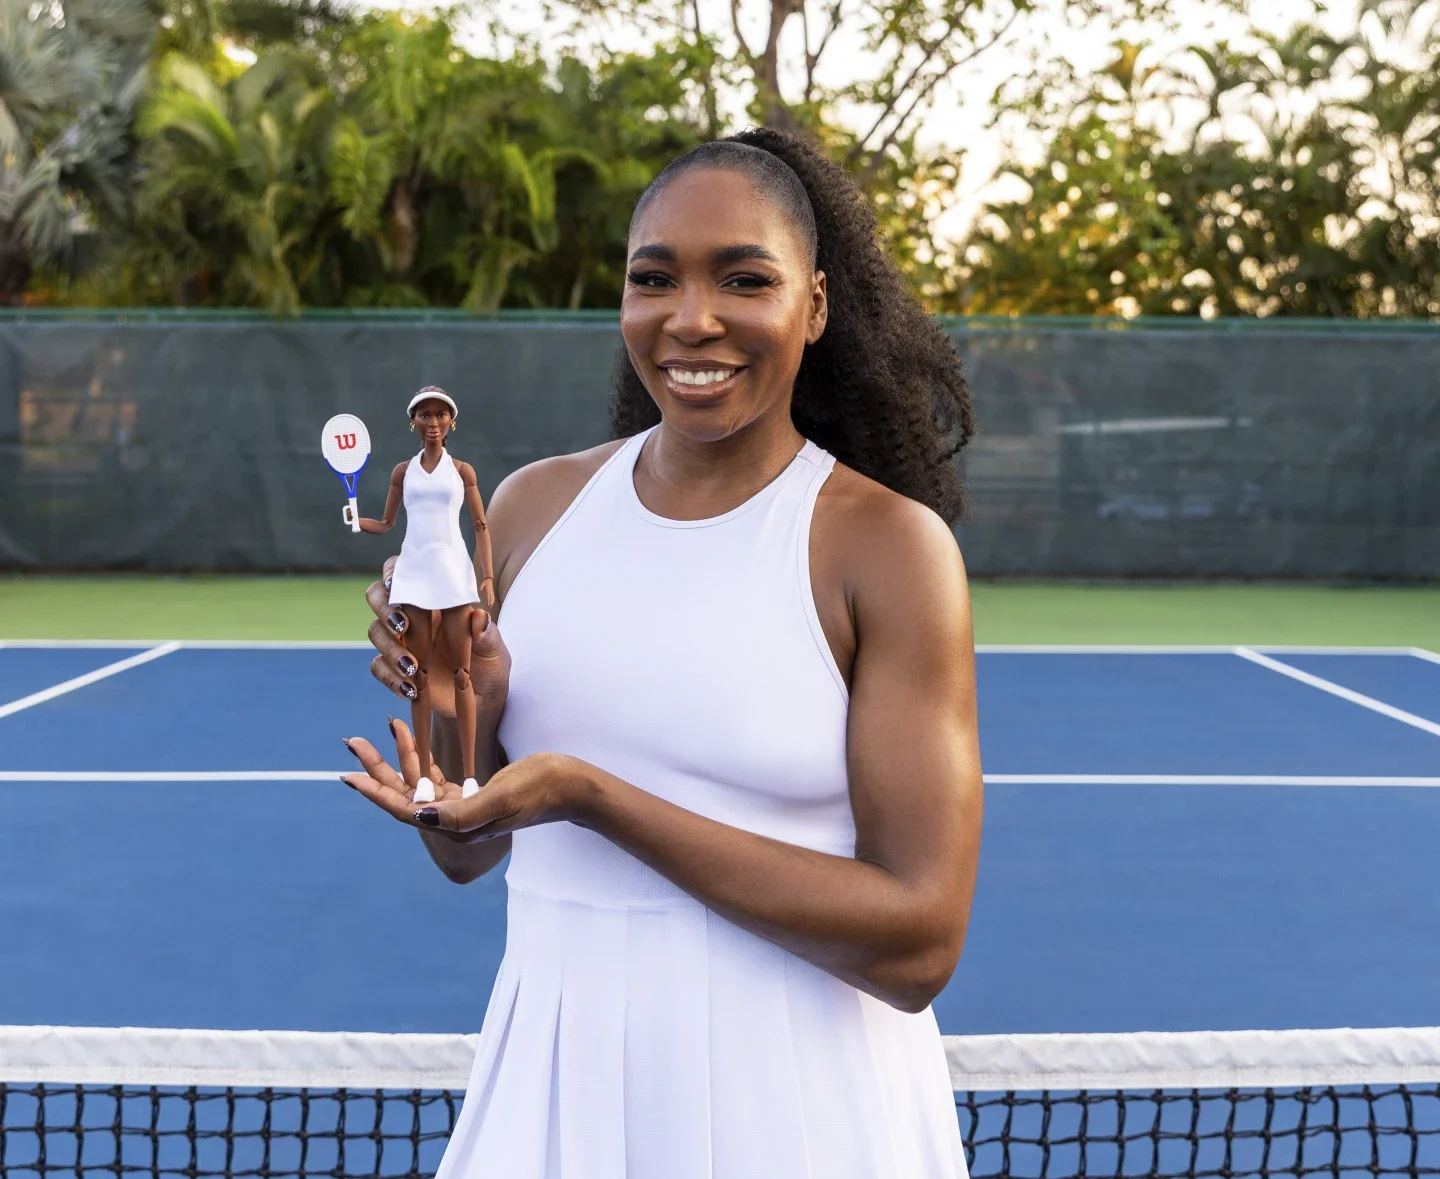 Venus Williams Celebrated With Her Own Barbie Doll In Mattel's Latest Campaign